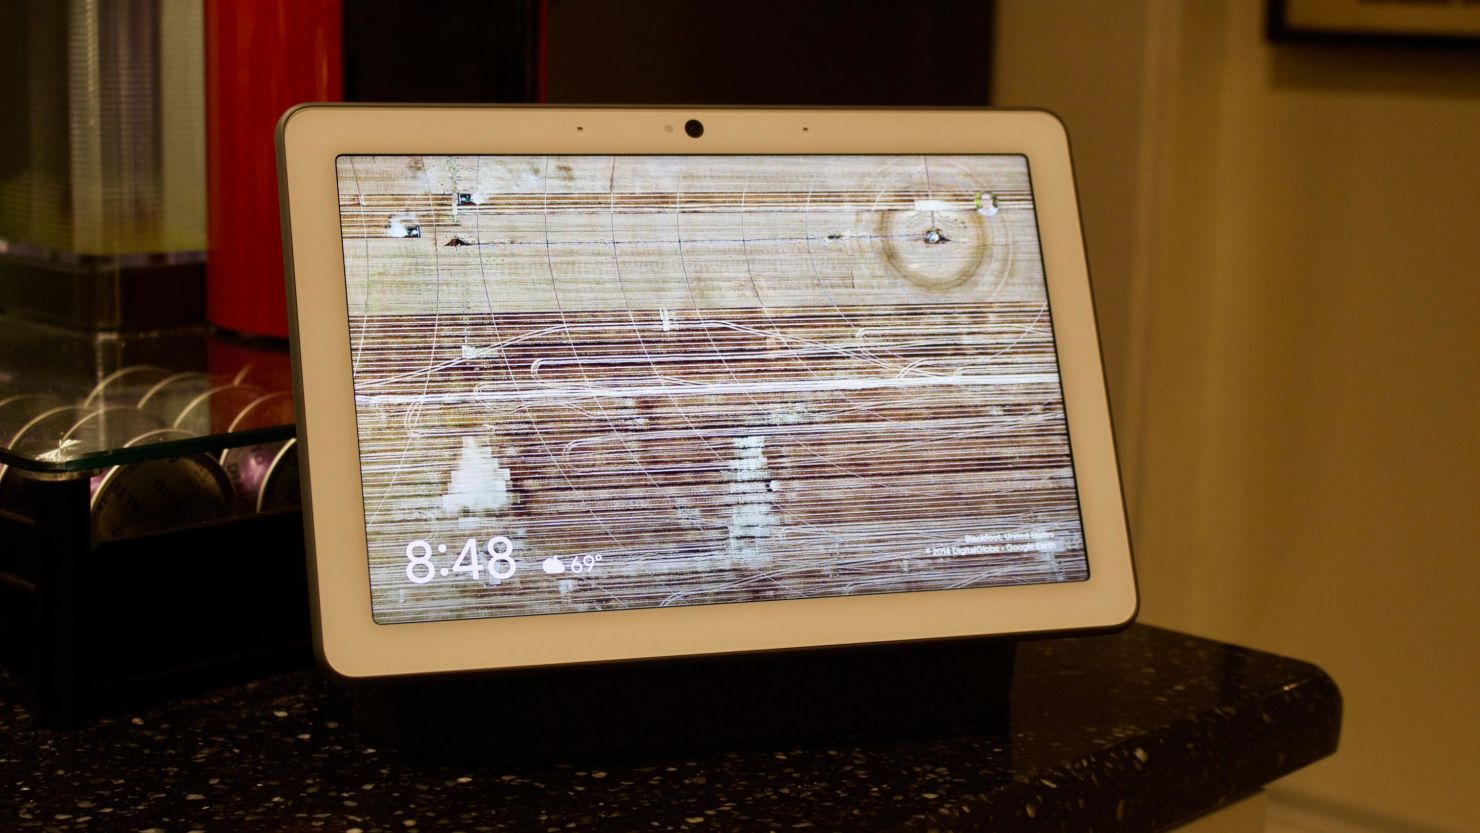 Google Nest Hub Max Review: Large Display, Excellent Speakers